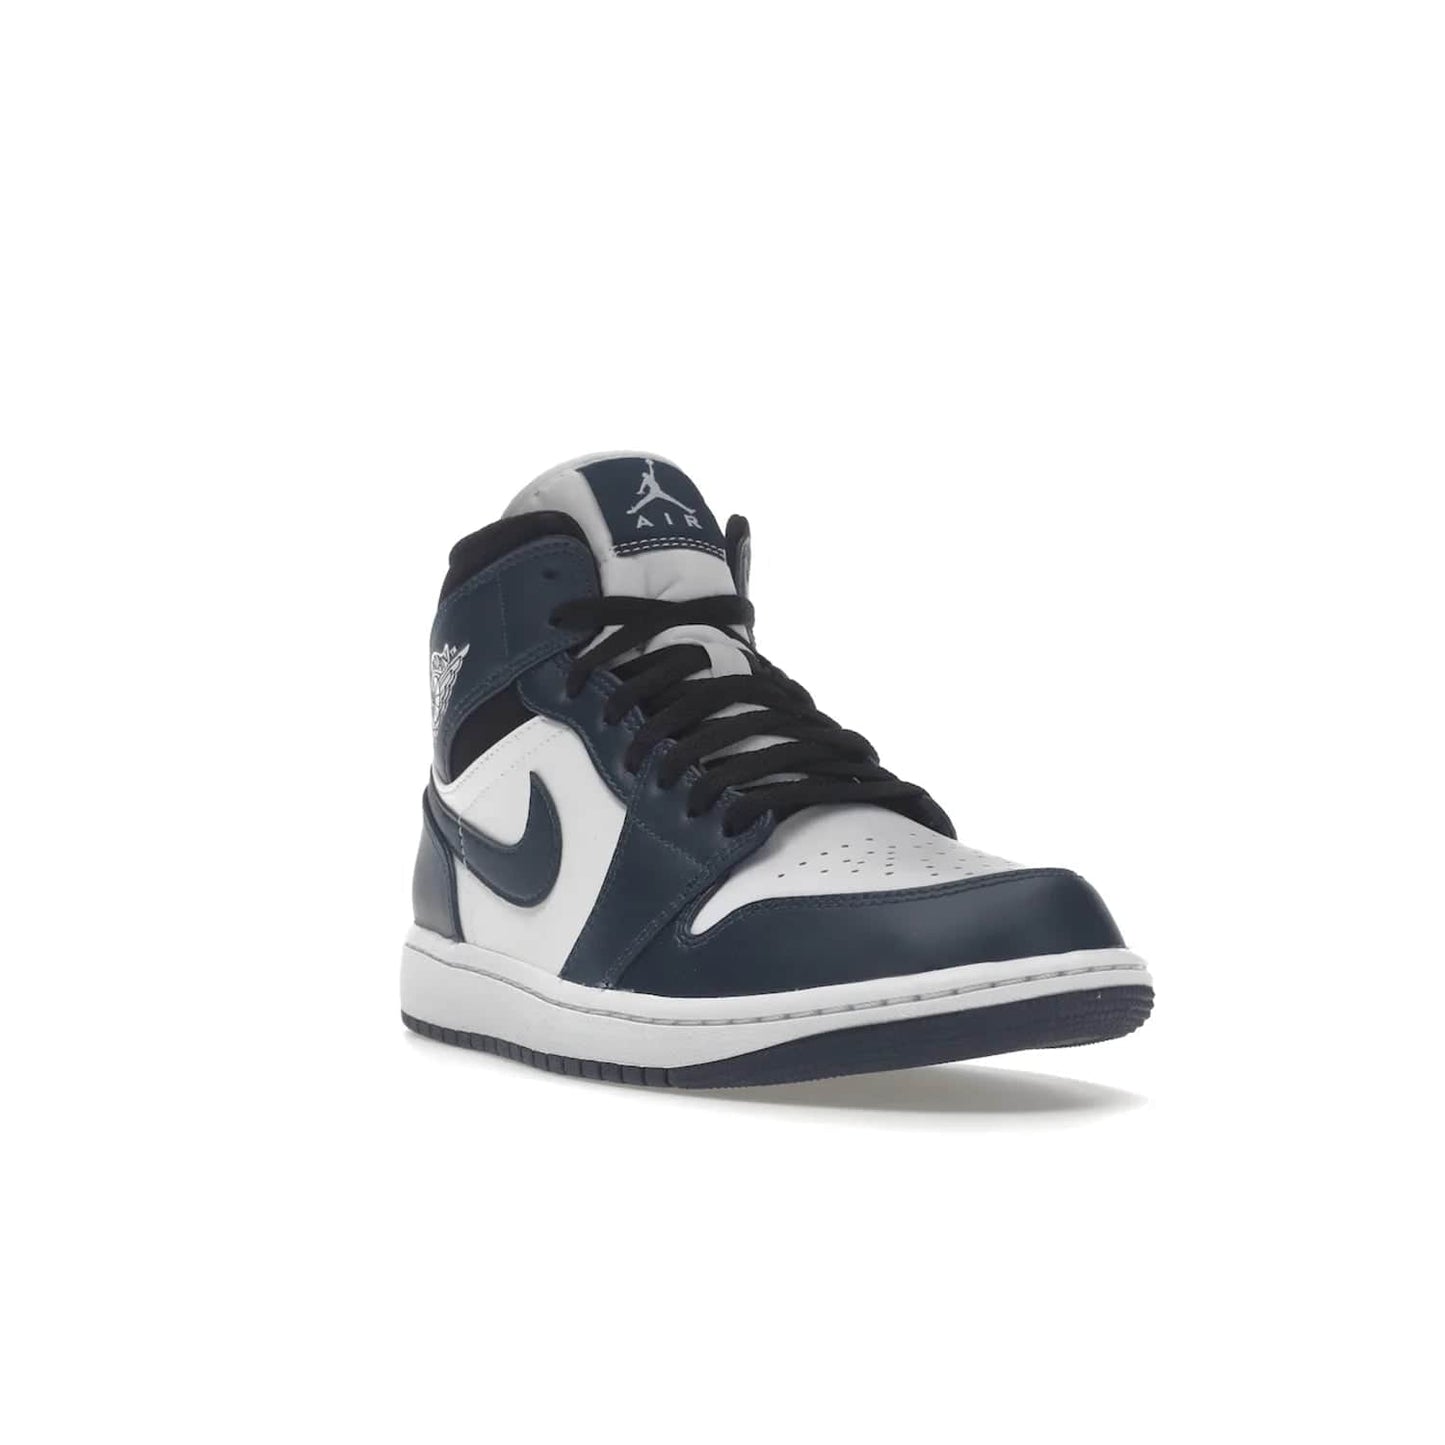 Jordan 1 Mid Armory Navy - Image 7 - Only at www.BallersClubKickz.com - The Jordan 1 Mid Armory Navy: classic basketball sneaker with soft white leather upper, deep navy blue overlays, and black leather ankle detailing. Iconic style with Jordan Wings logo and Jumpman label.